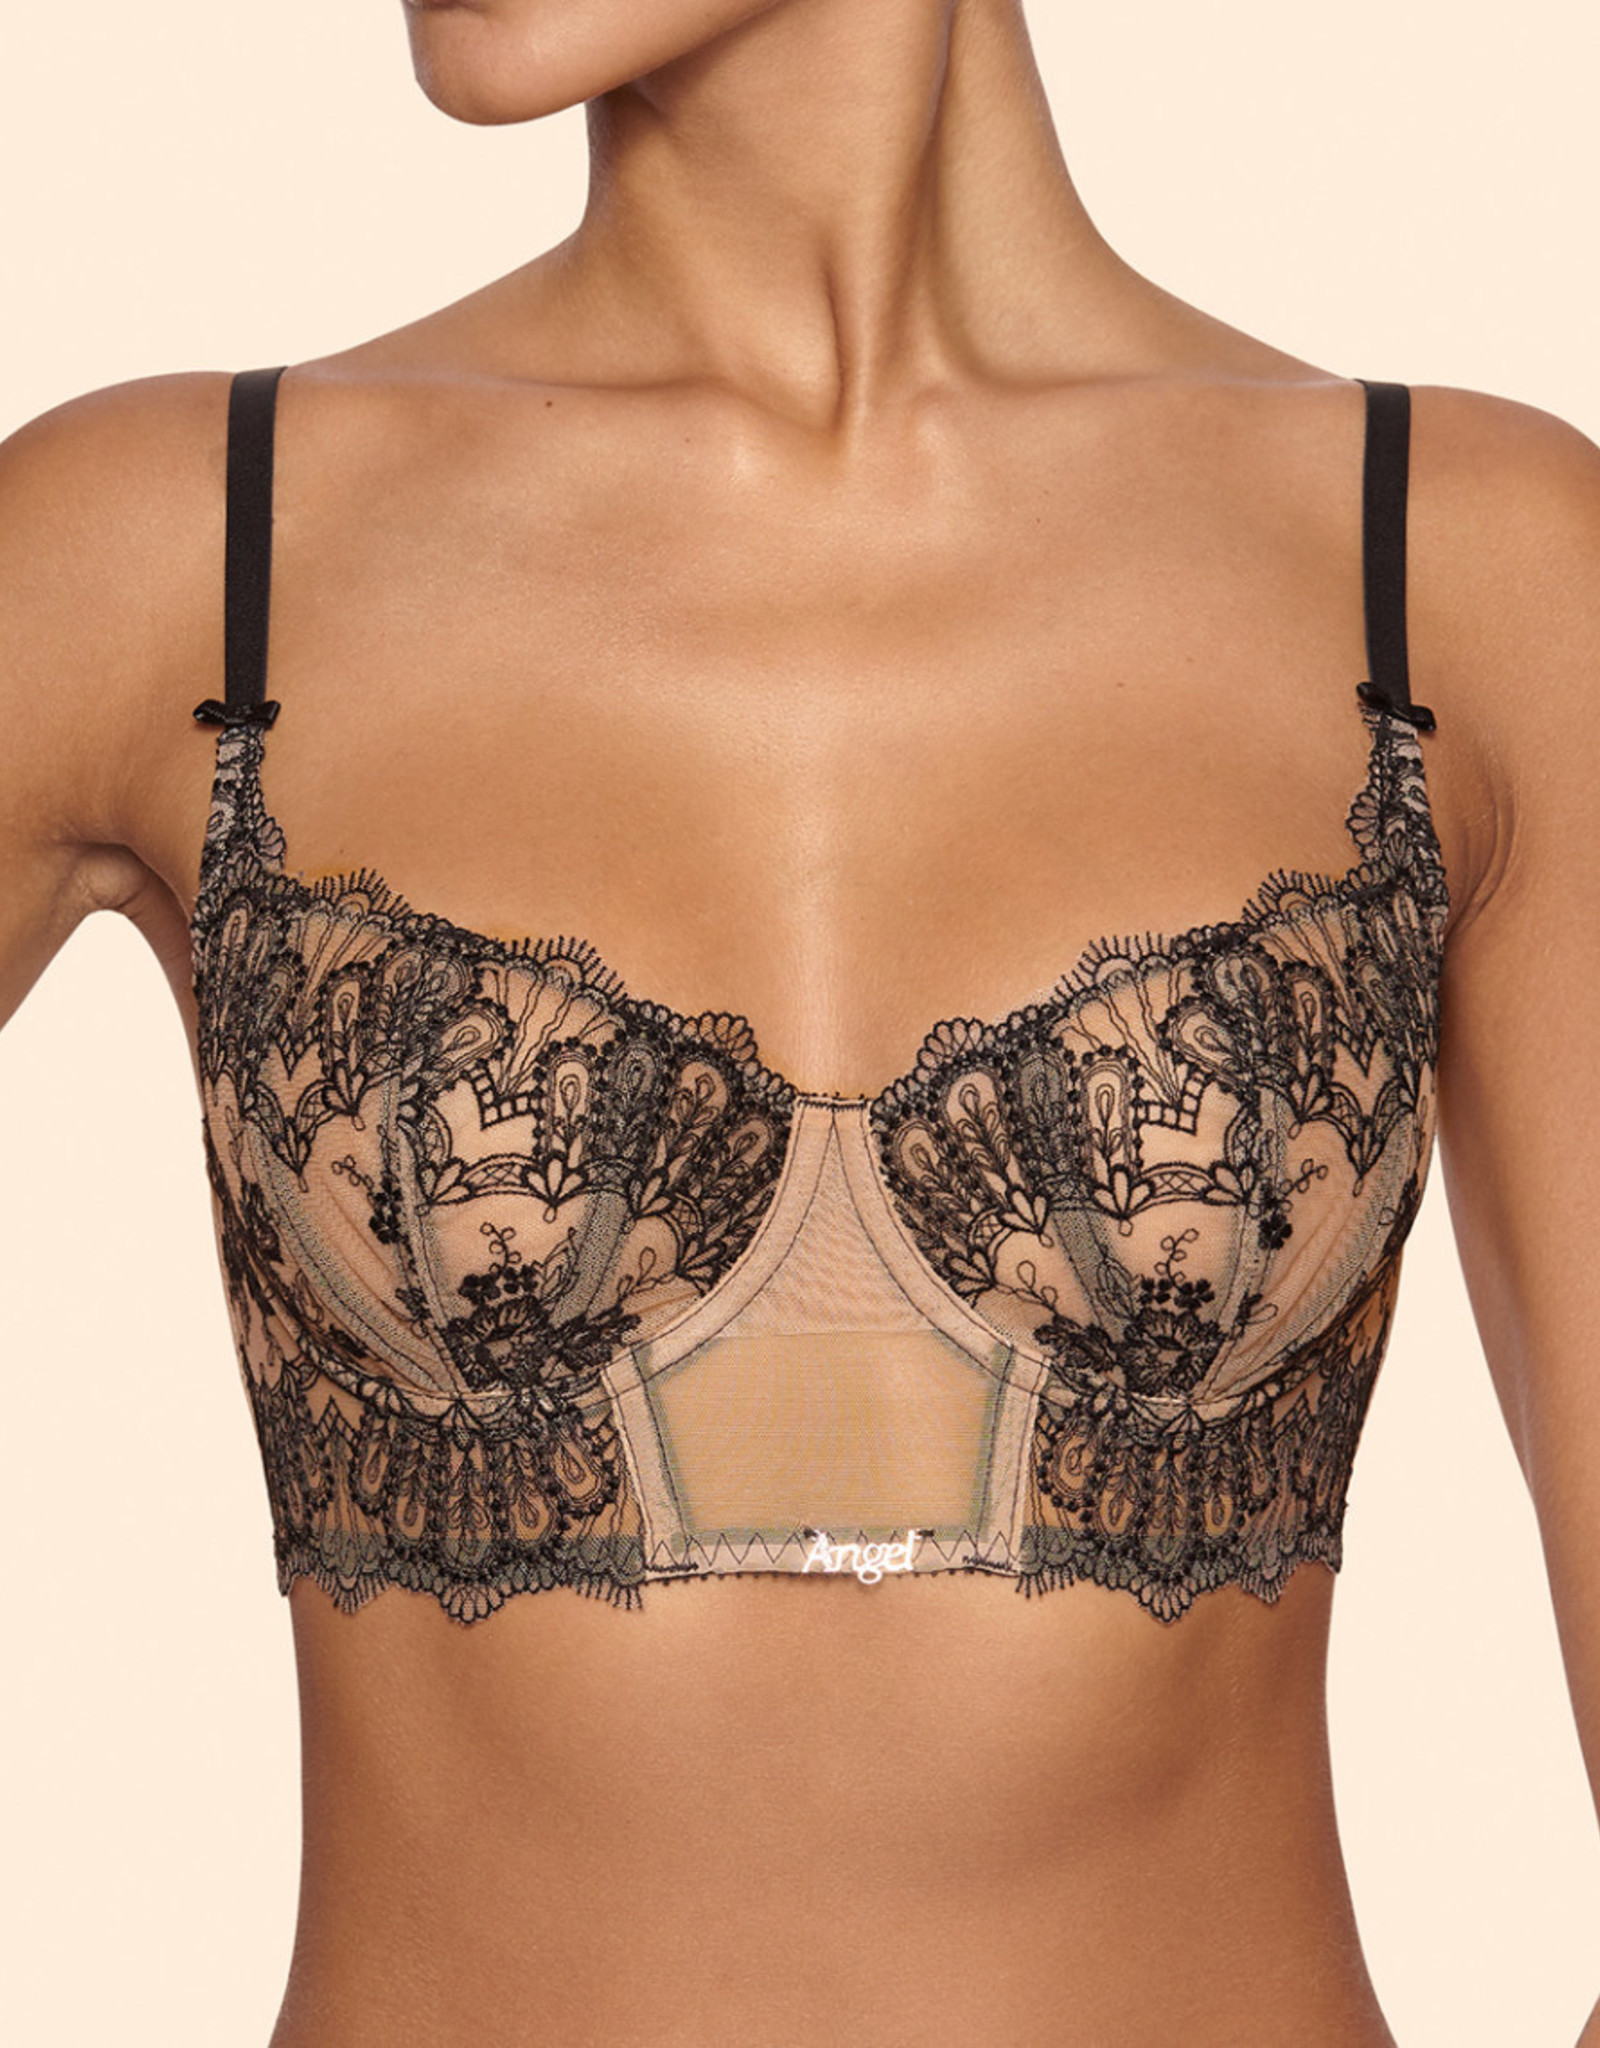 Ajour Ross Padded Bra in Shampagne FINAL SALE (75% Off) - Busted Bra Shop